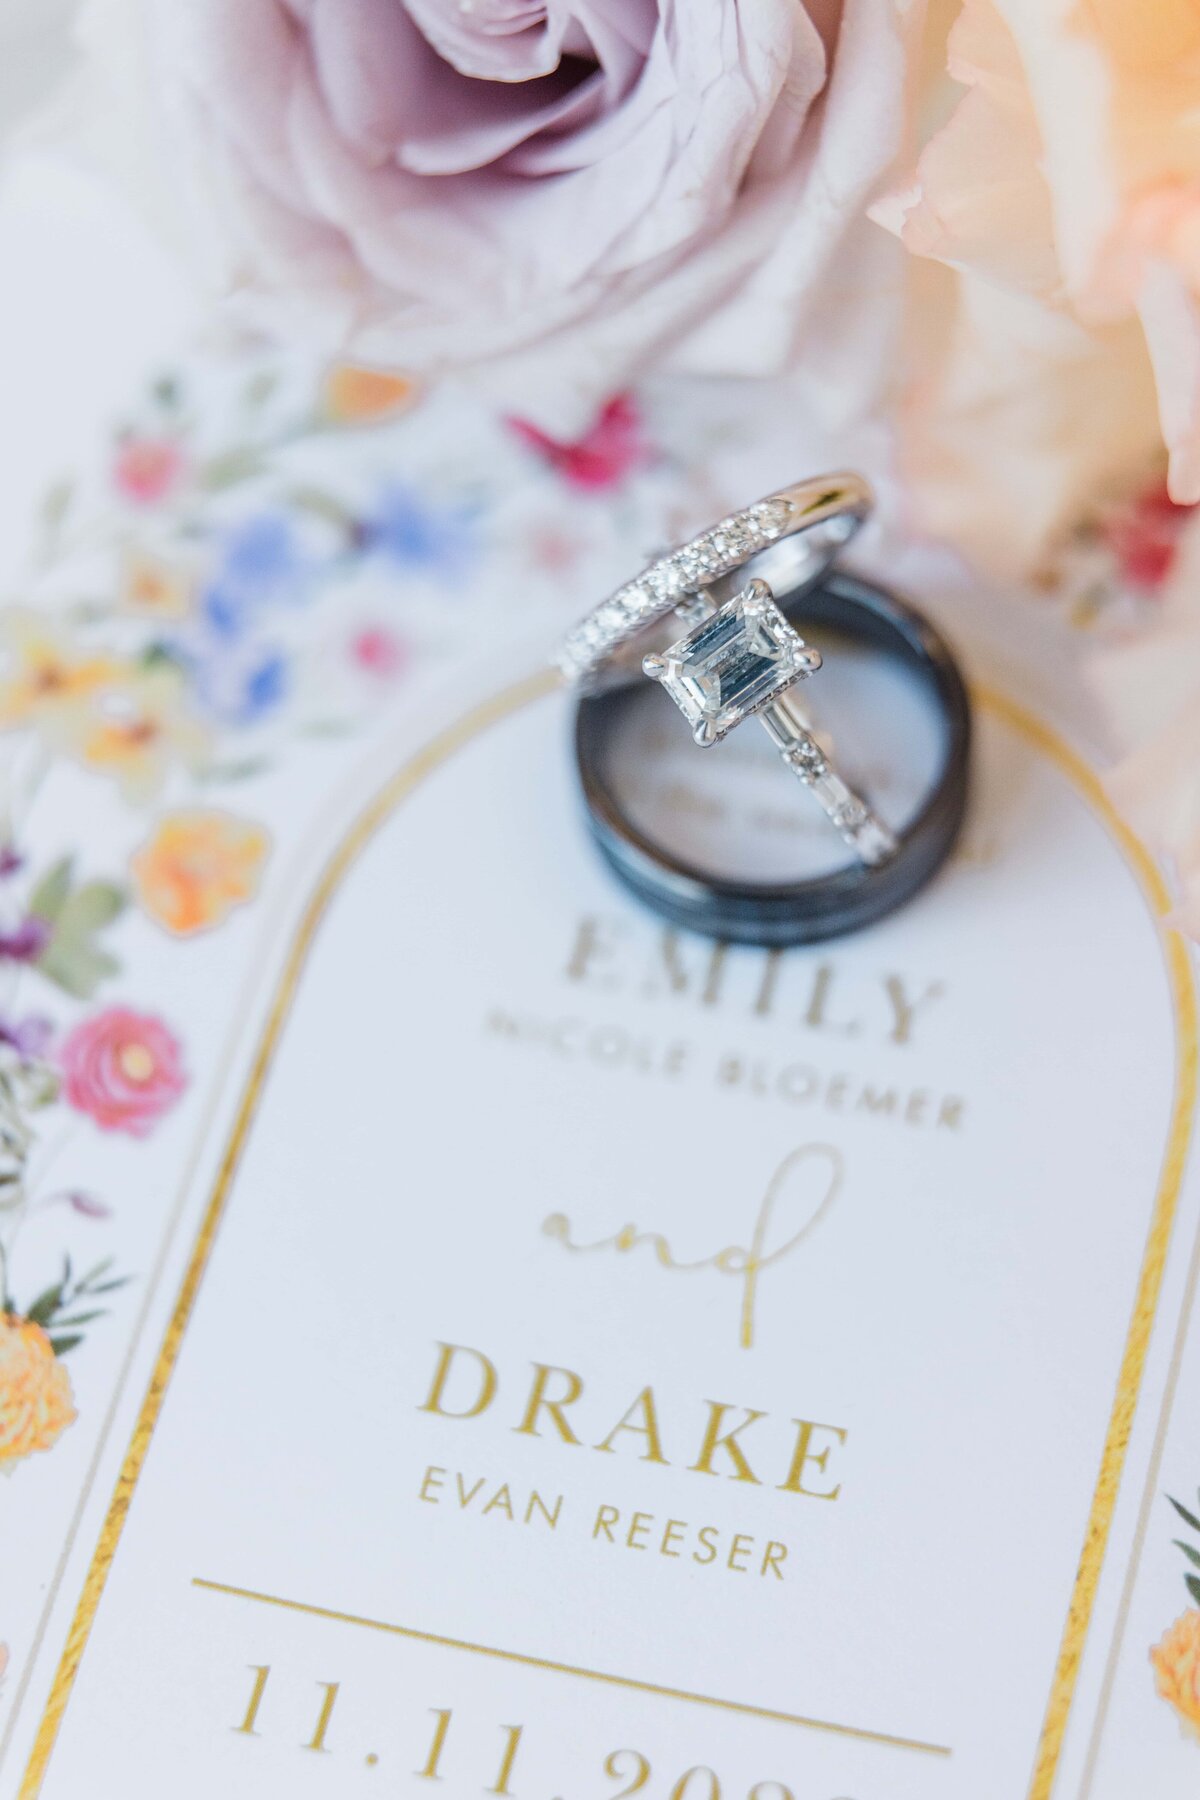 Close-up of an engagement ring on a floral wedding invitation with names "Nicole Bloomer and Drake Evan Reeser" and date "11.11.2029", coordinated by a renowned wedding